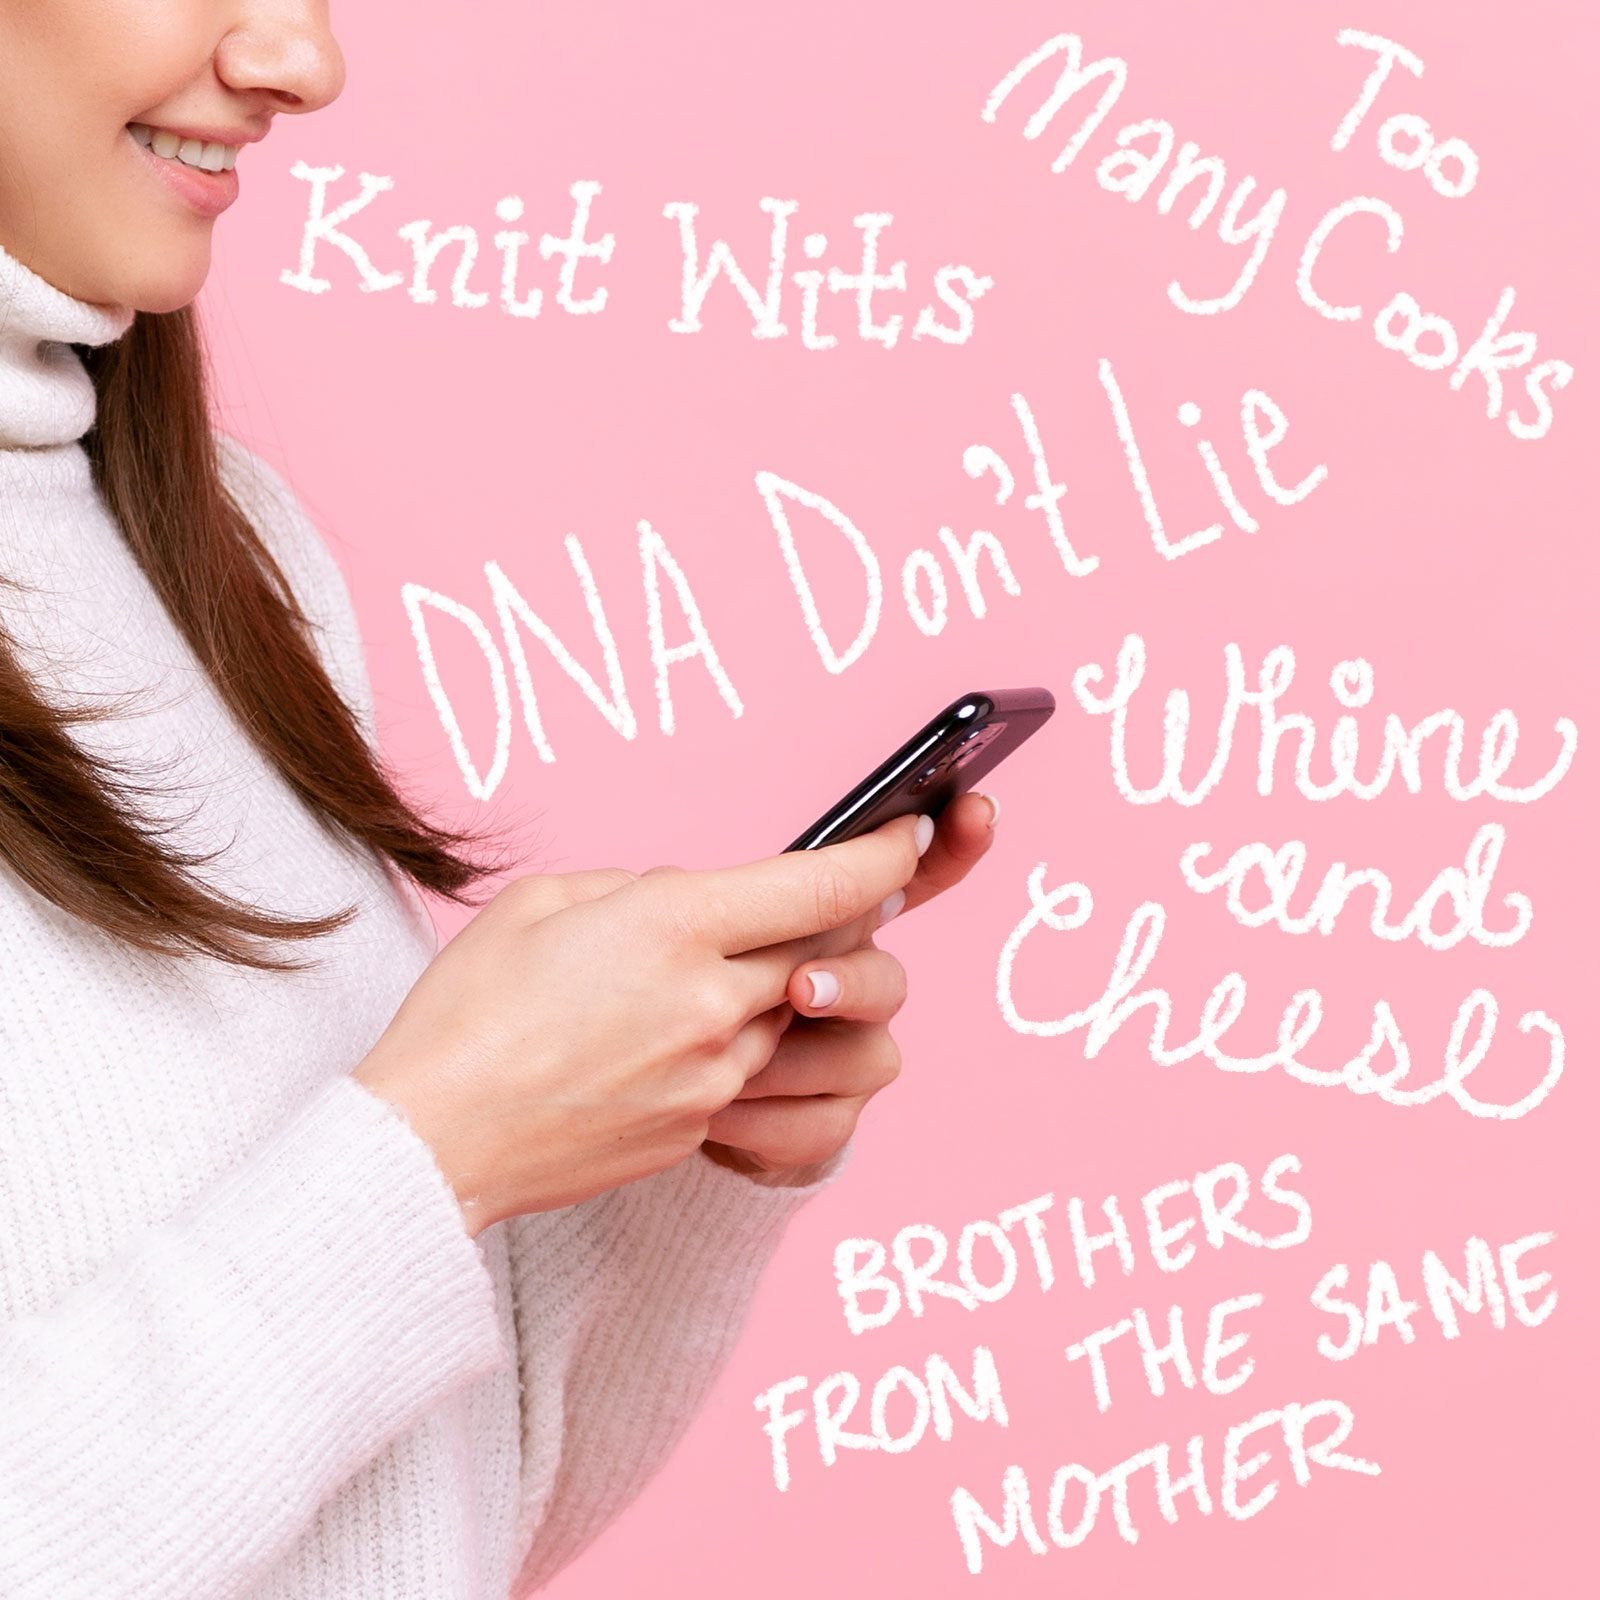 Chit-Chat, Small talk and Gossip – mum's going nuts